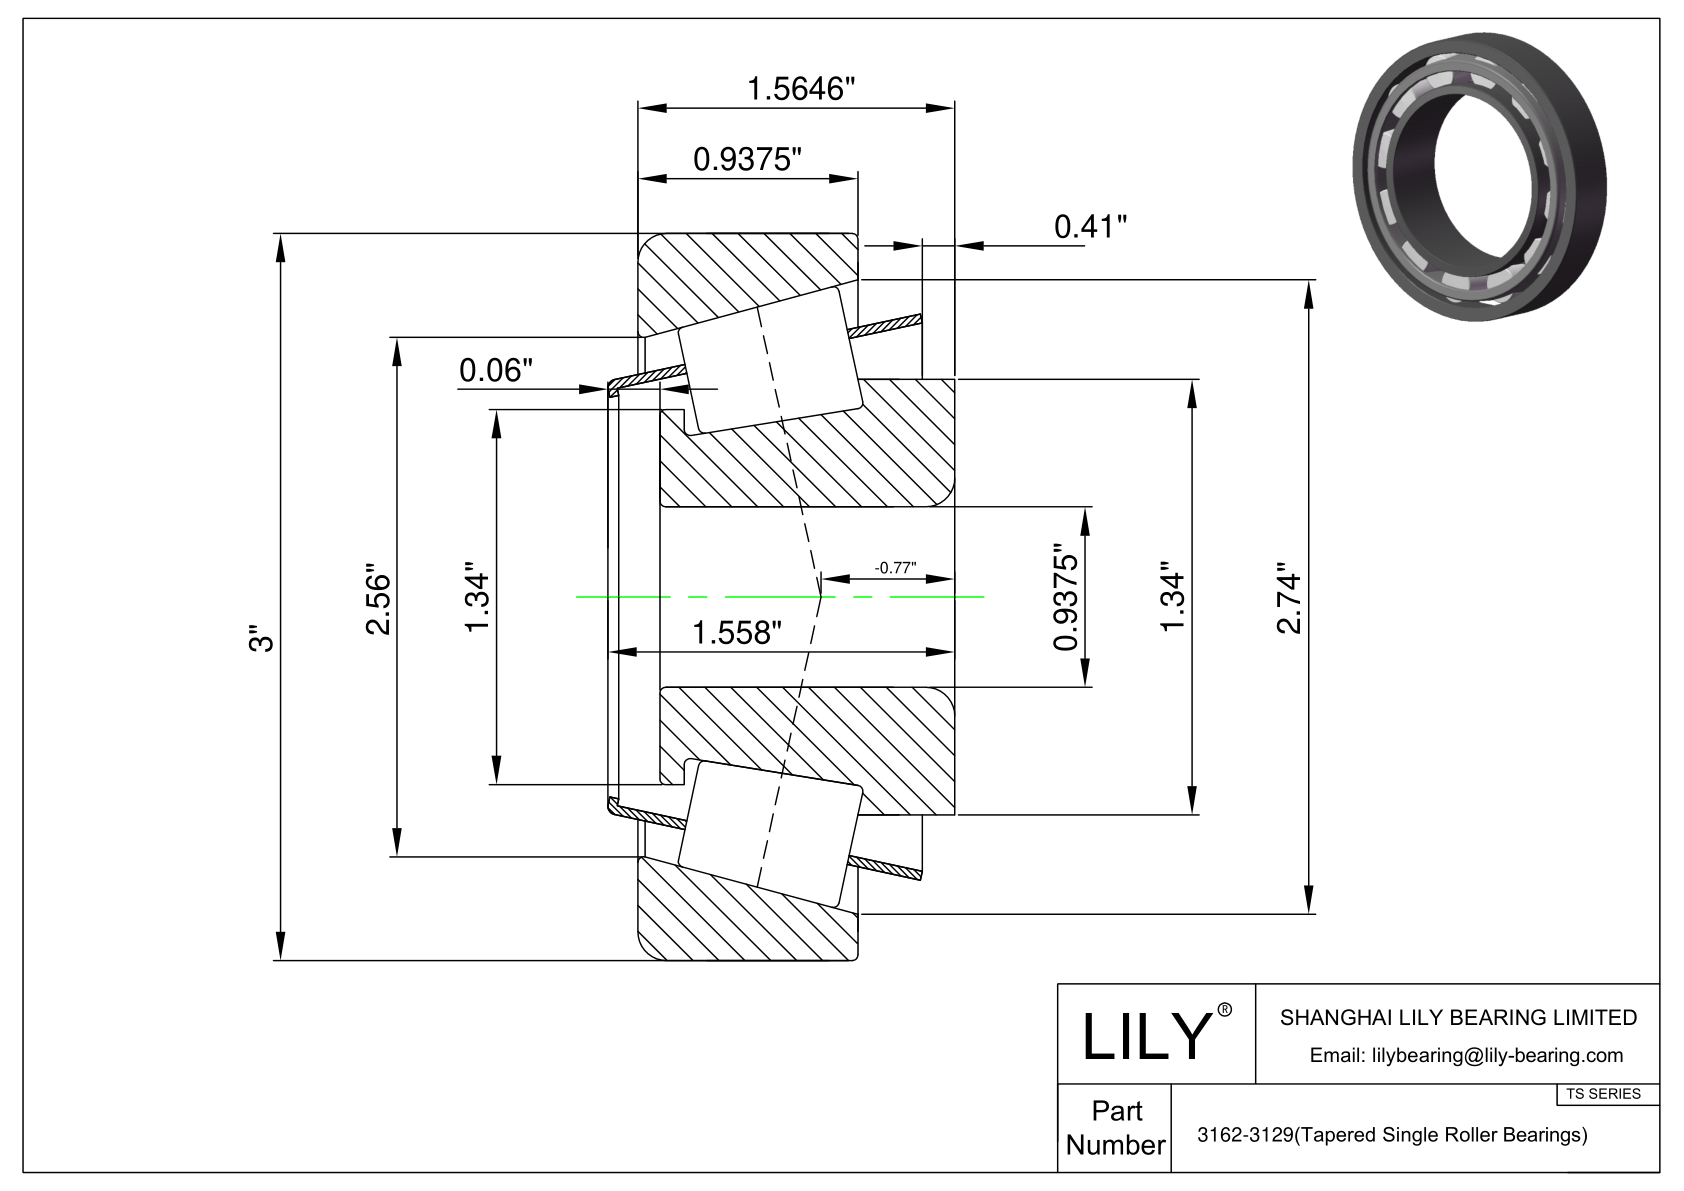 3162-3129 TS (Tapered Single Roller Bearings) (Imperial) cad drawing